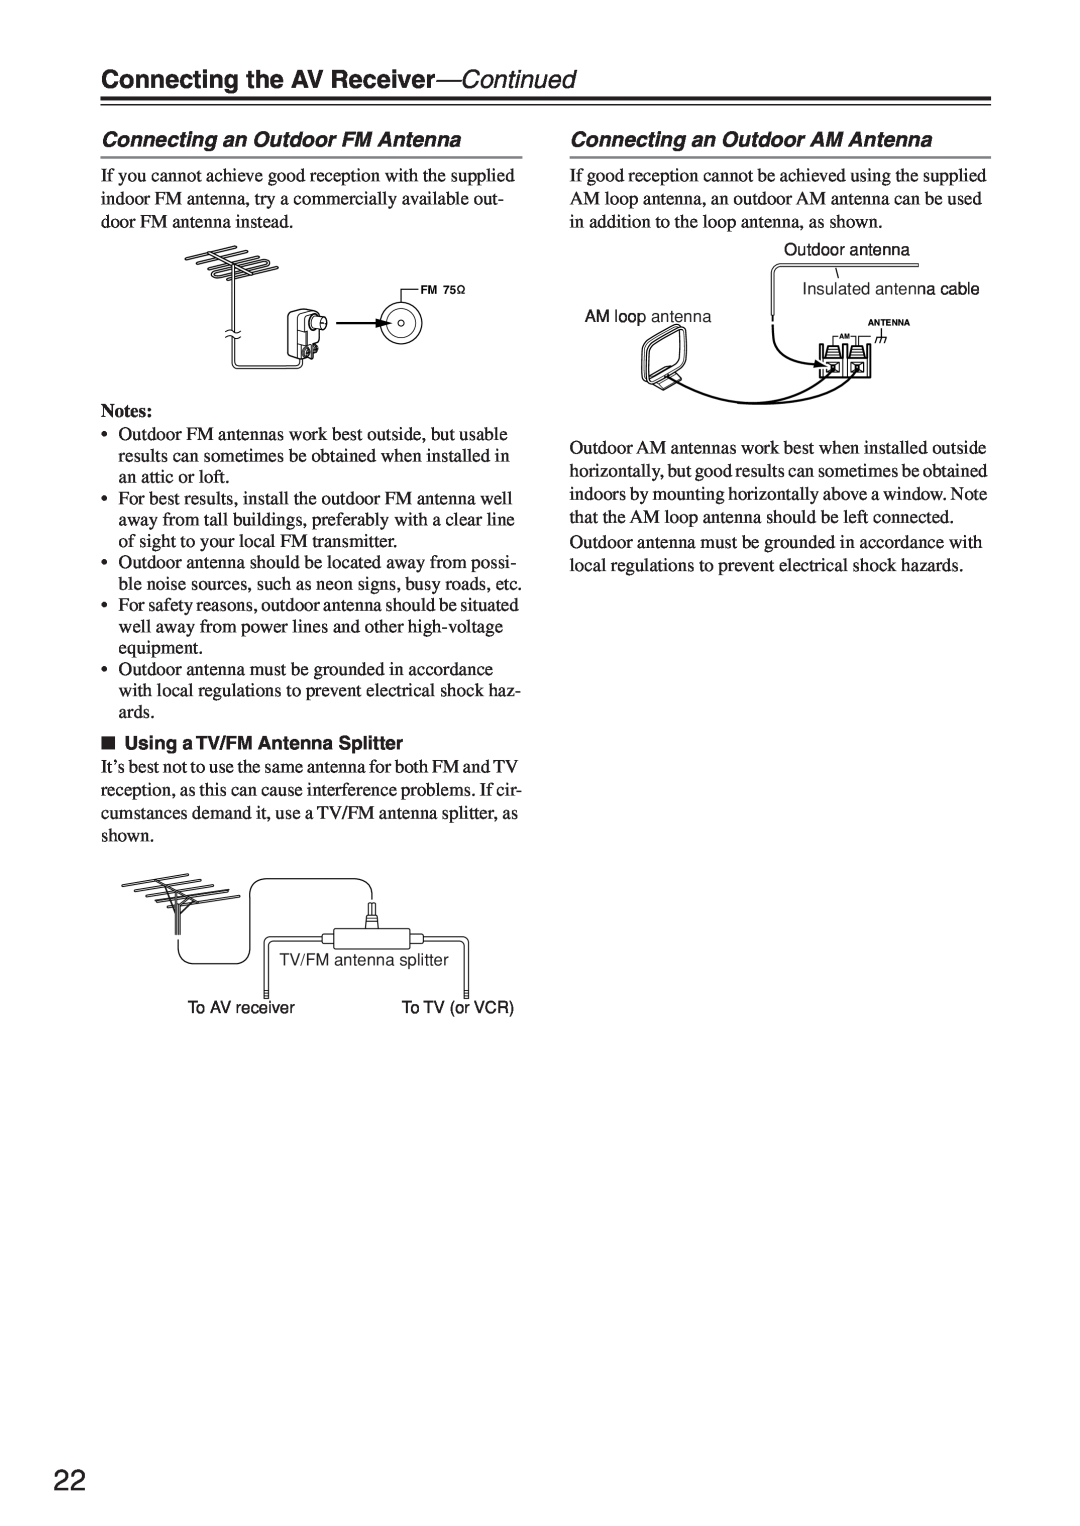 Onkyo HT-R640 Connecting an Outdoor FM Antenna, Connecting an Outdoor AM Antenna, Connecting the AV Receiver-Continued 